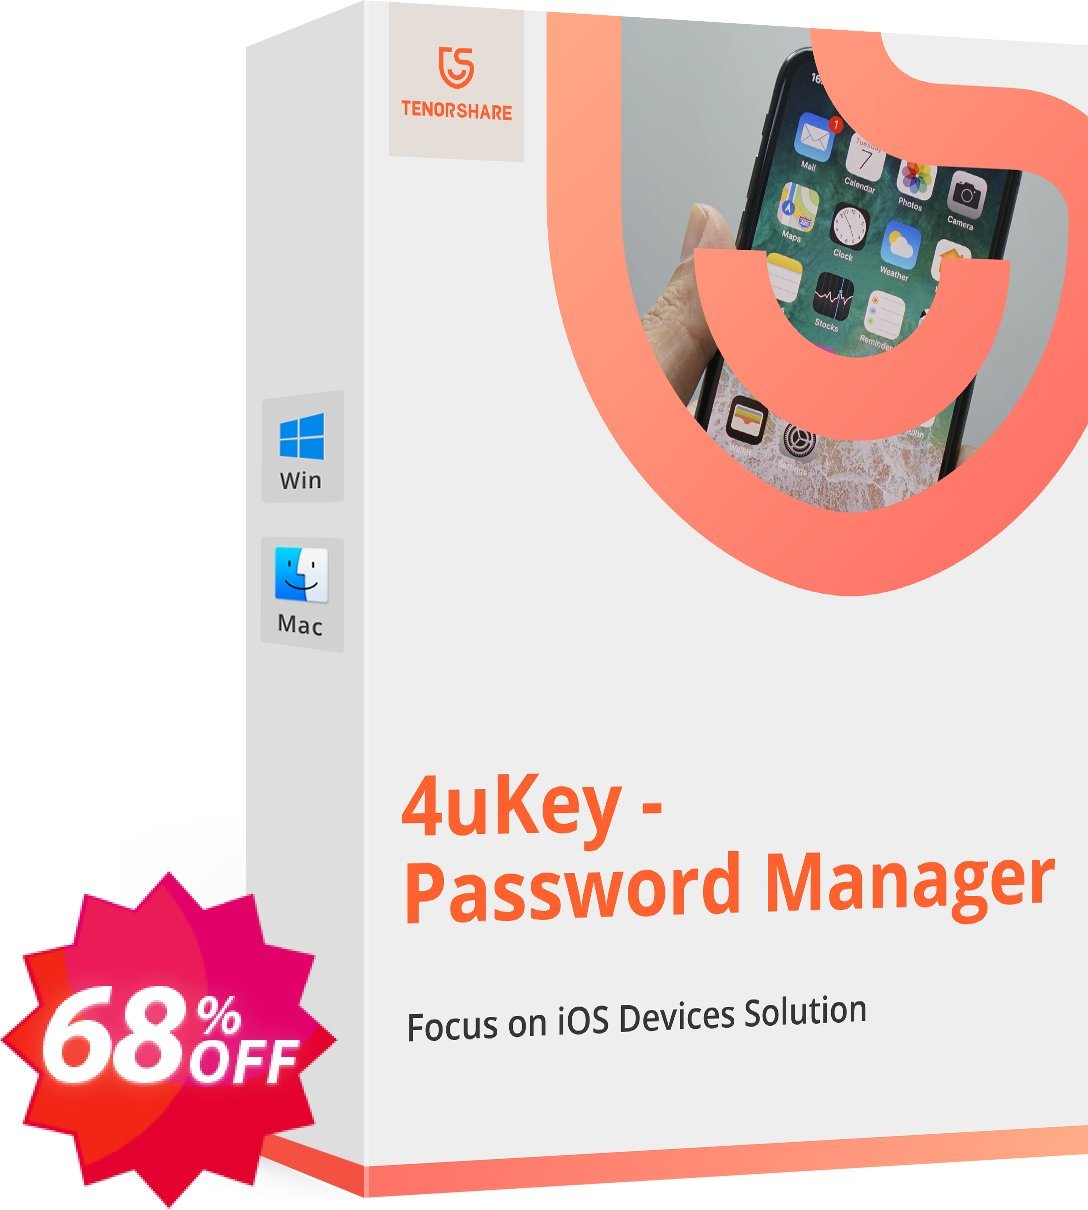 Tenorshare 4uKey Password Manager, Yearly Plan  Coupon code 68% discount 